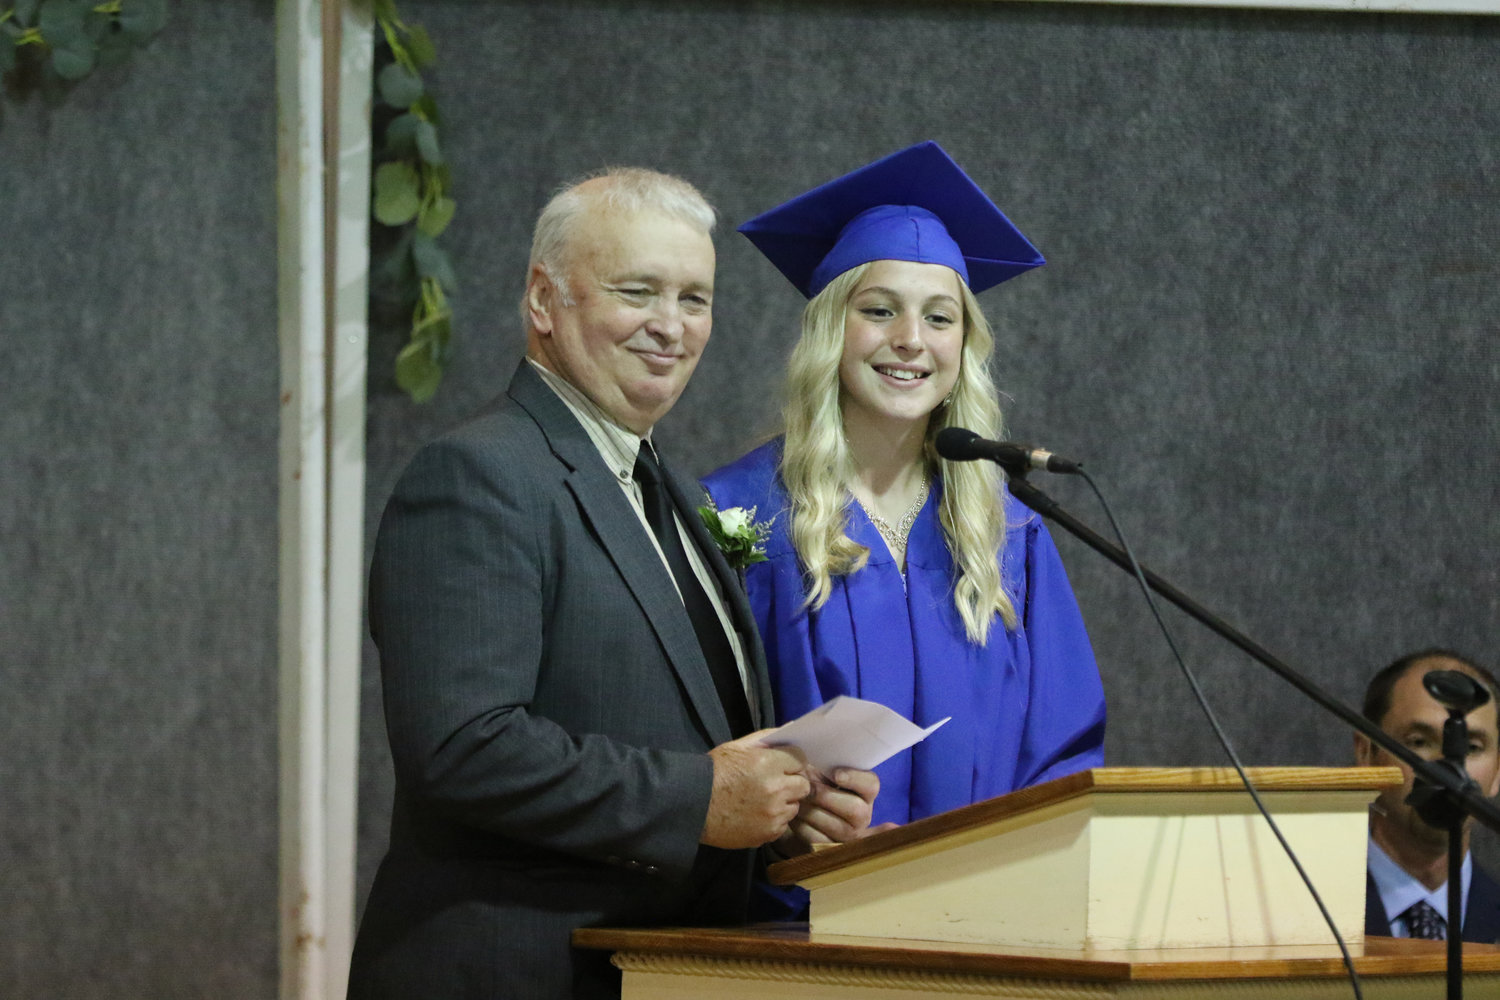 Mariah Miller presents the class gift to principal Lawrence Schlabach during Pathway Christian School's graduation ceremony on May 16, 2021.